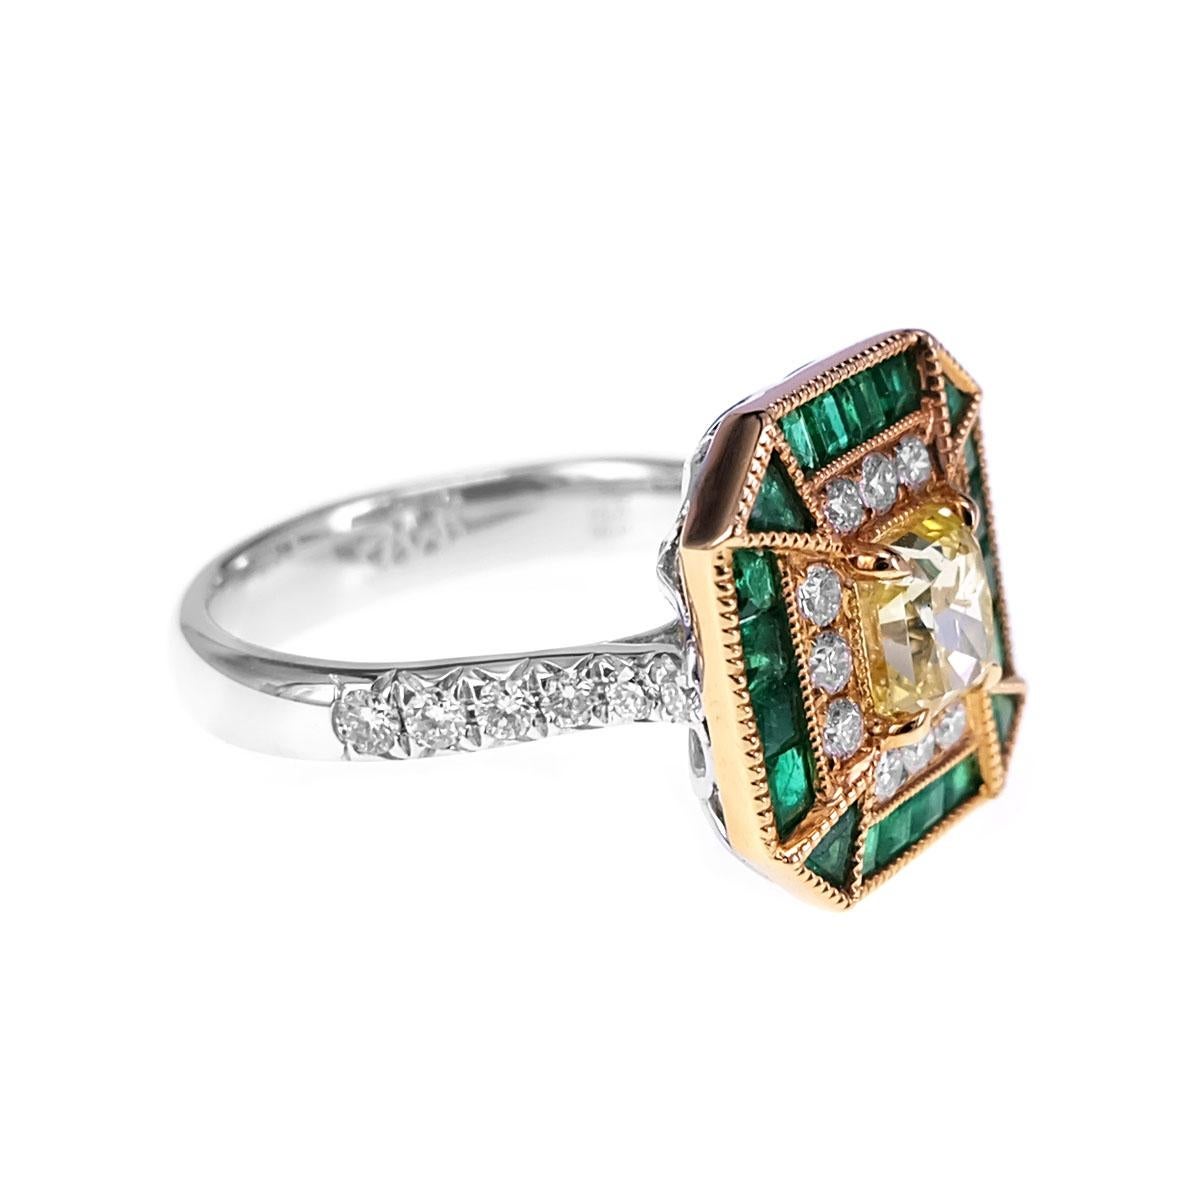 A GIA certified 1.03 carat Fancy Intense Yellow diamond is set along with 0.71 carats of Vivid Green Emerald and 0.41 carats of white round brilliant diamond. The details of the ring are mentioned below:
Color: F
Clarity: Vs
Ring Size: US 6
Ring